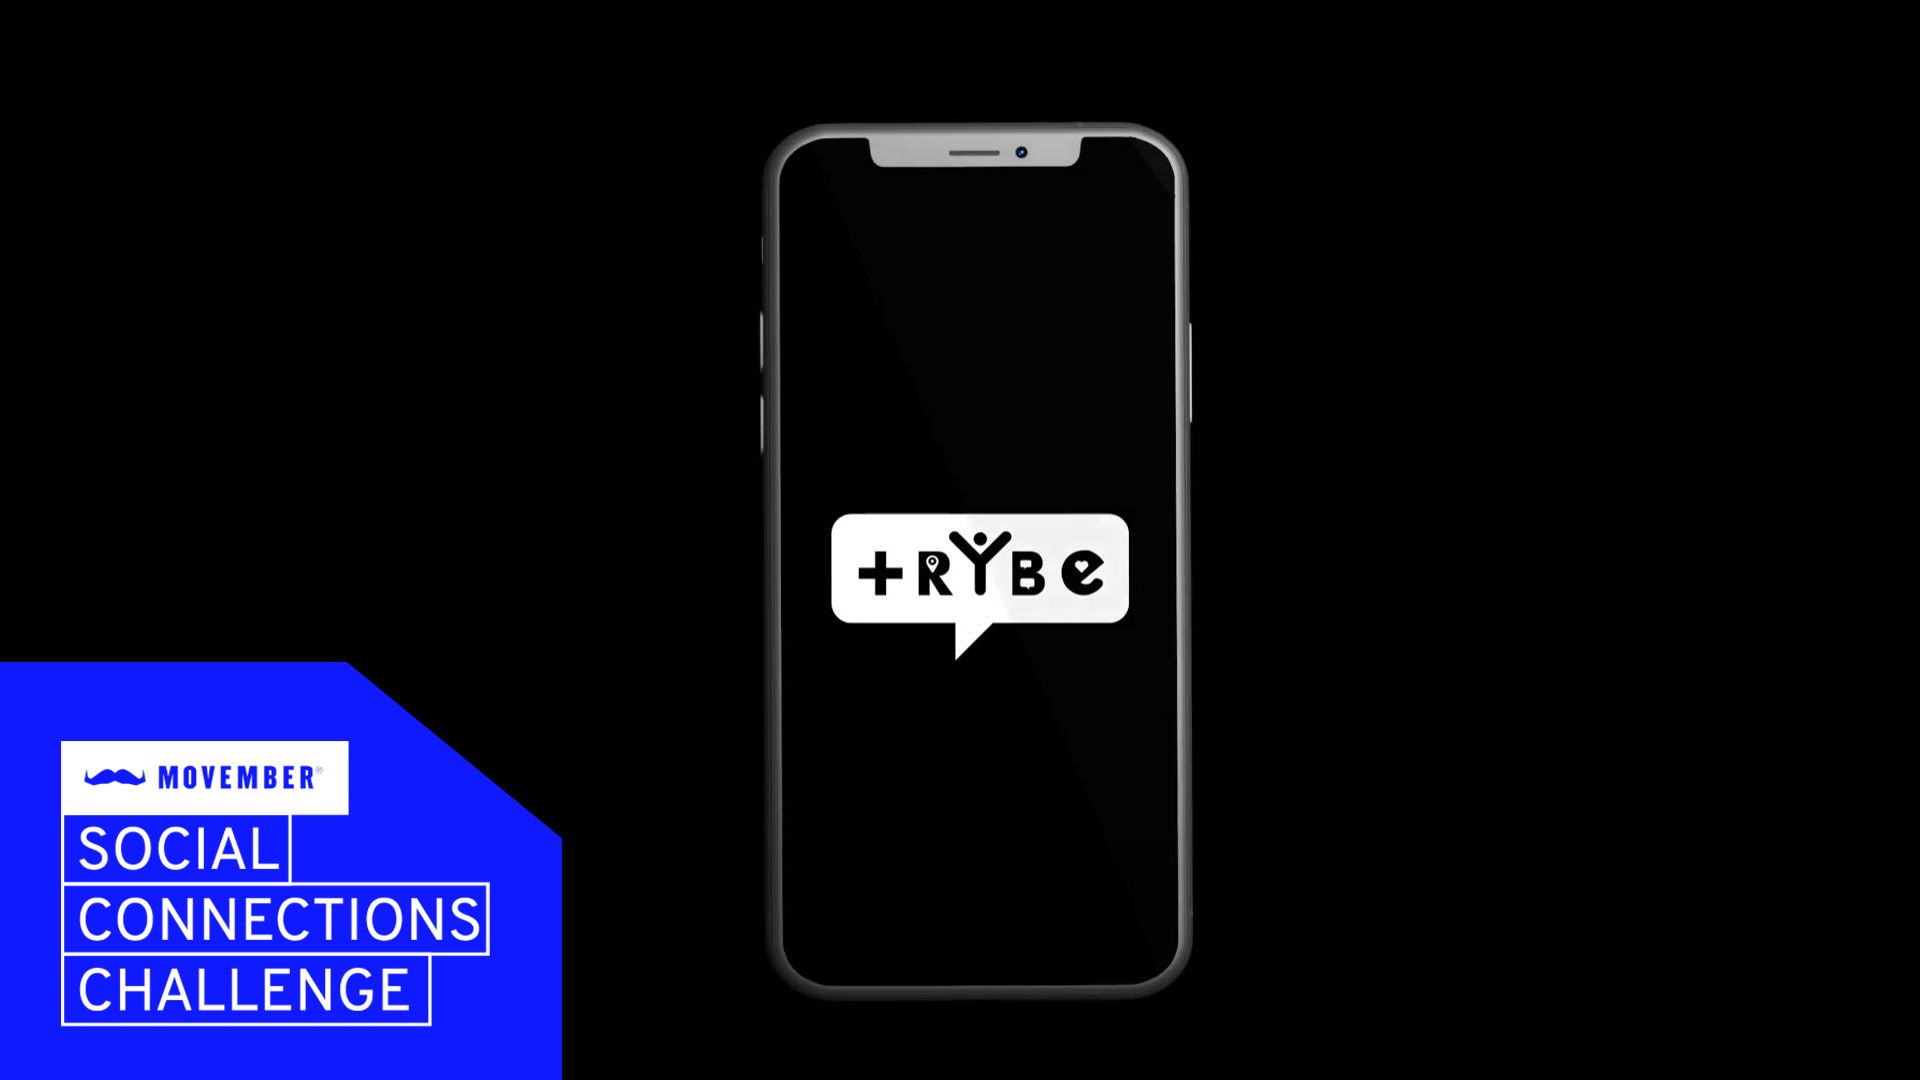 A mock-up of TRYBE on an iPhone screen